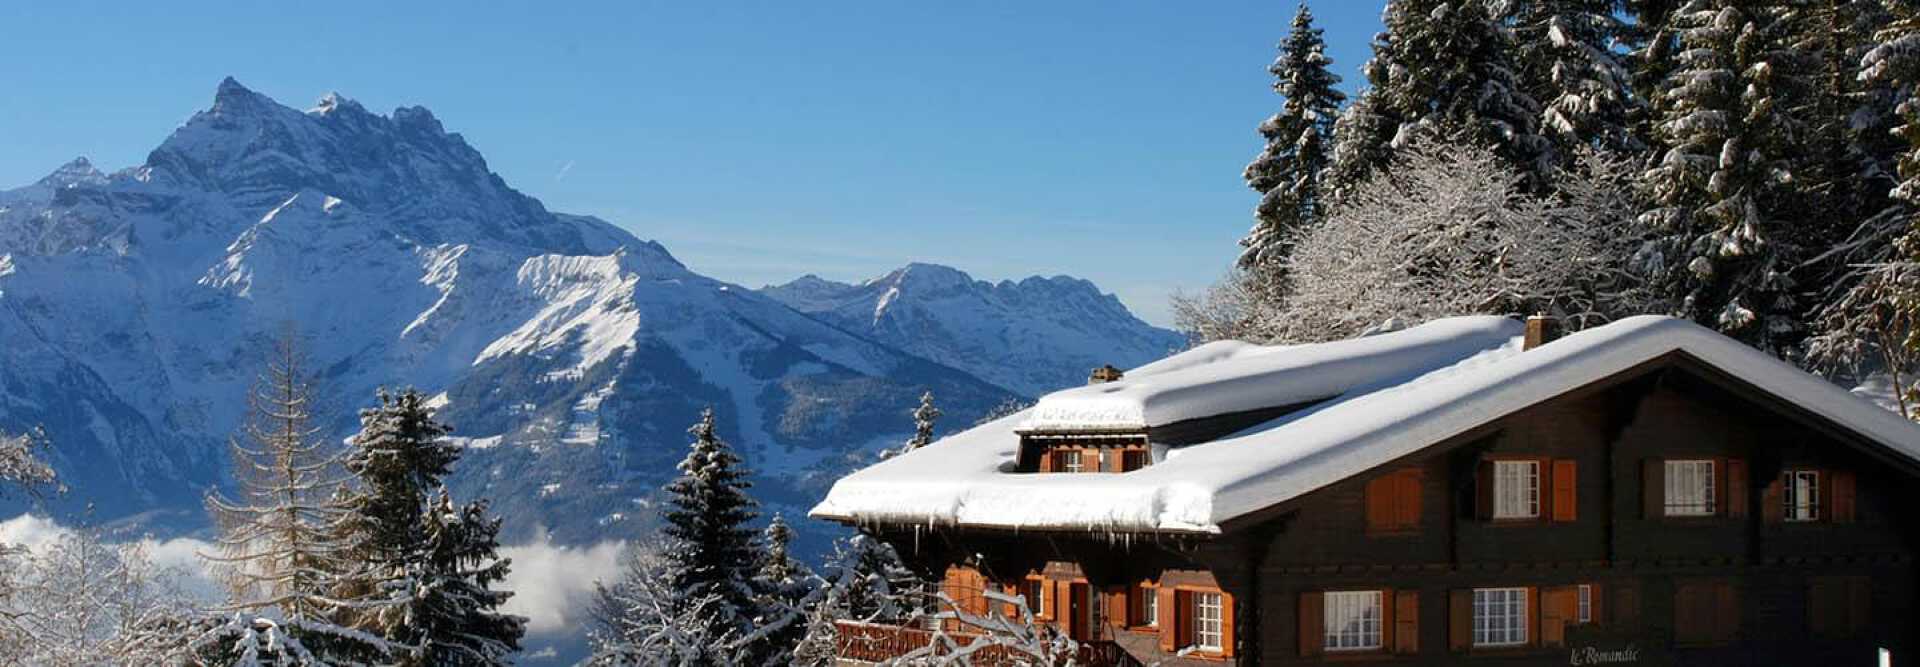 On the right is a chalet with a snow-covered roof, in the distance on the left are the mountains. Villars, Switzerland.